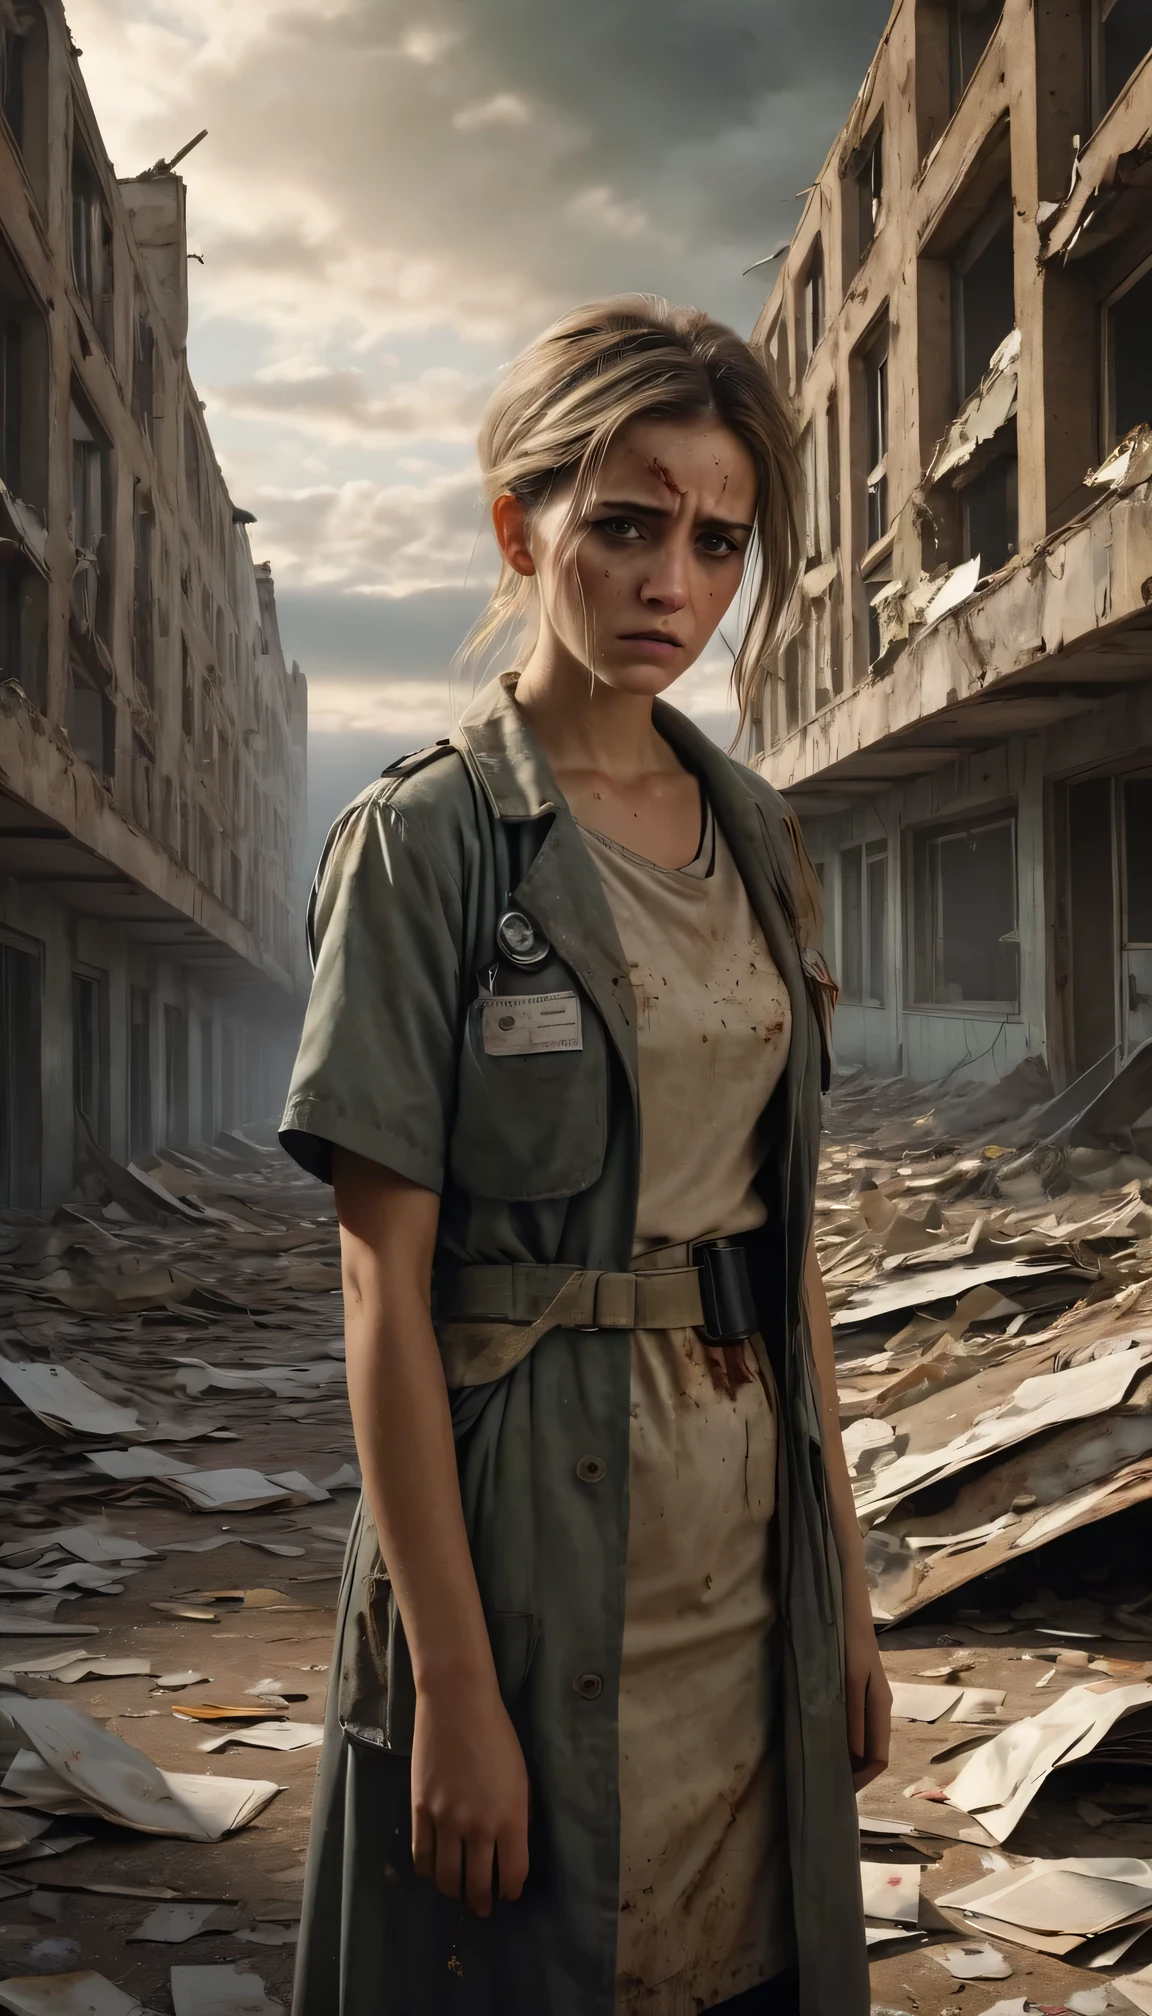 (best quality,4k,8k,highres,masterpiece:1.2),ultra-detailed,post-apocalyptic wasteland,desolate hospital,barren landscape,indoor,dusty atmosphere,overgrown with weeds,ruined buildings,crumbling walls,injured girl, a stretcher,abandoned medical equipment,flickering dim lights,shattered windows,faint sunlight peeking through the cracks,silence interrupted by distant echoes,decaying furniture and belongings,mysterious medical experiments,empty corridors and hallways,sadness in her realistic,photorealistic:1.37 eyes,dirty bandages,makeshift bandages,desperation on her face,anguished expression,muted colors,ominous clouds in the sky,ruined cityscape in the background,tattered clothes,hope in her eyes,scattered papers and documents,decipherable symbols on the walls,evocative art style,contrast between destruction and resilience,heart-wrenching story hidden within the scene